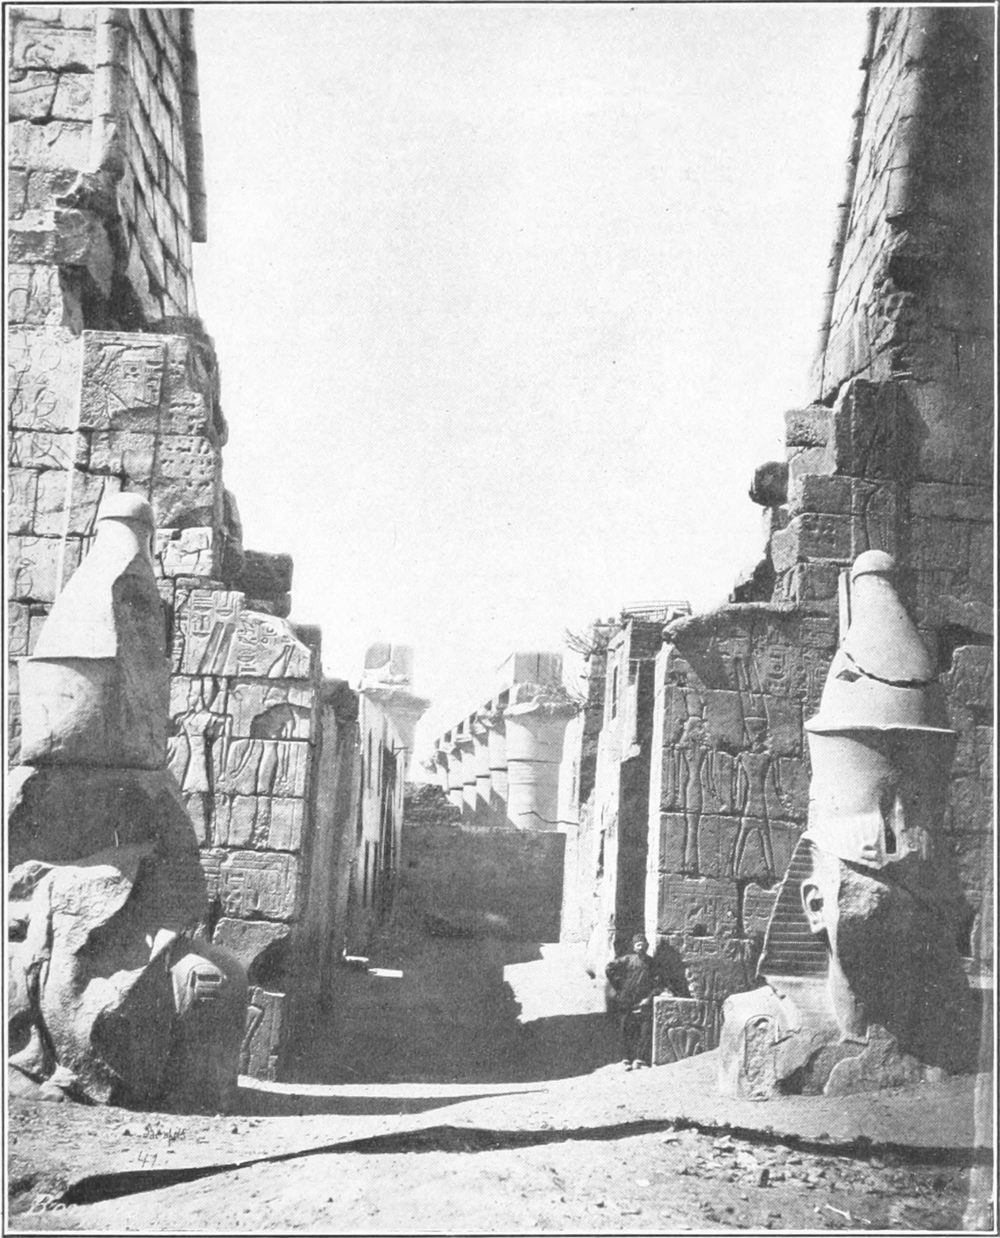 A photograph of the Temple at Luxor